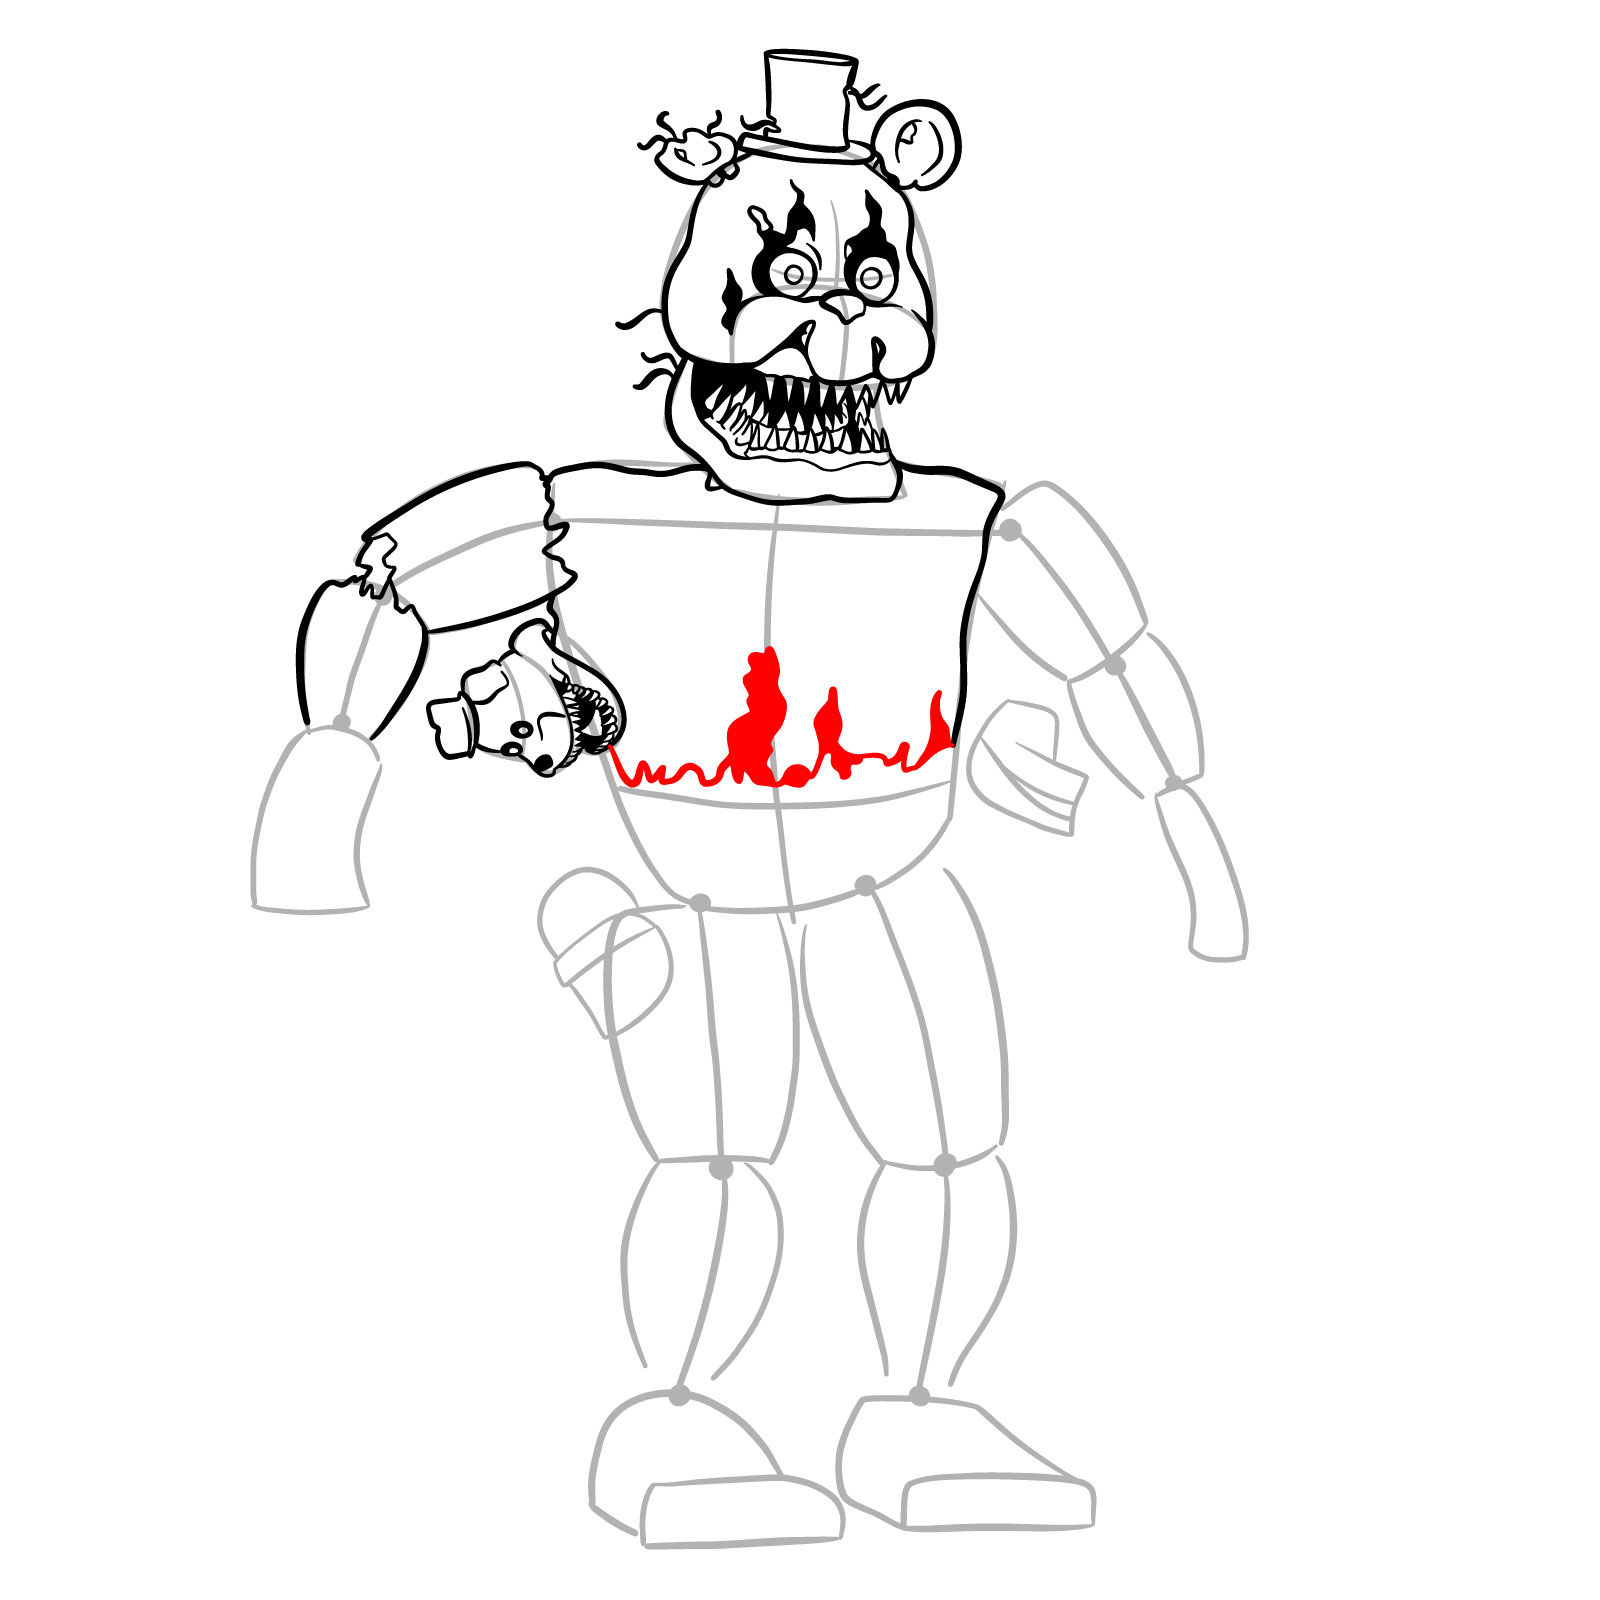 How to draw Nightmare Freddy - step 23